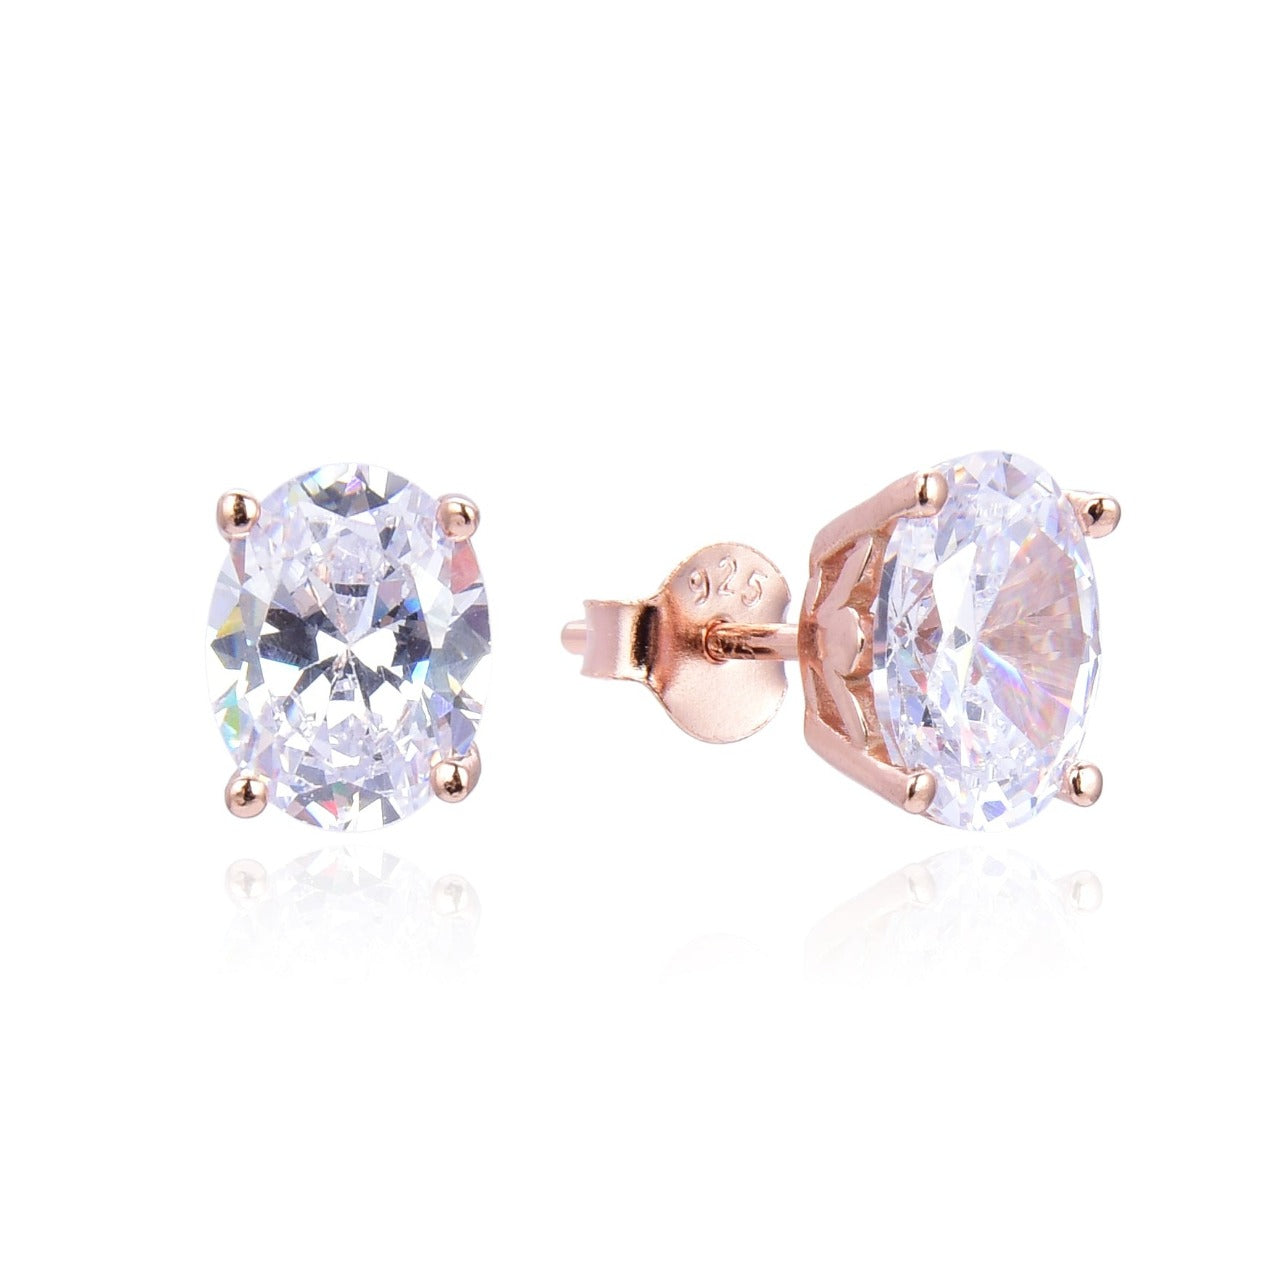 Kilkenny Silver Rose Gold Oval Stud Earrings  Rose gold plated sterling silver oval shaped stud earrings with cubic zirconia stones.